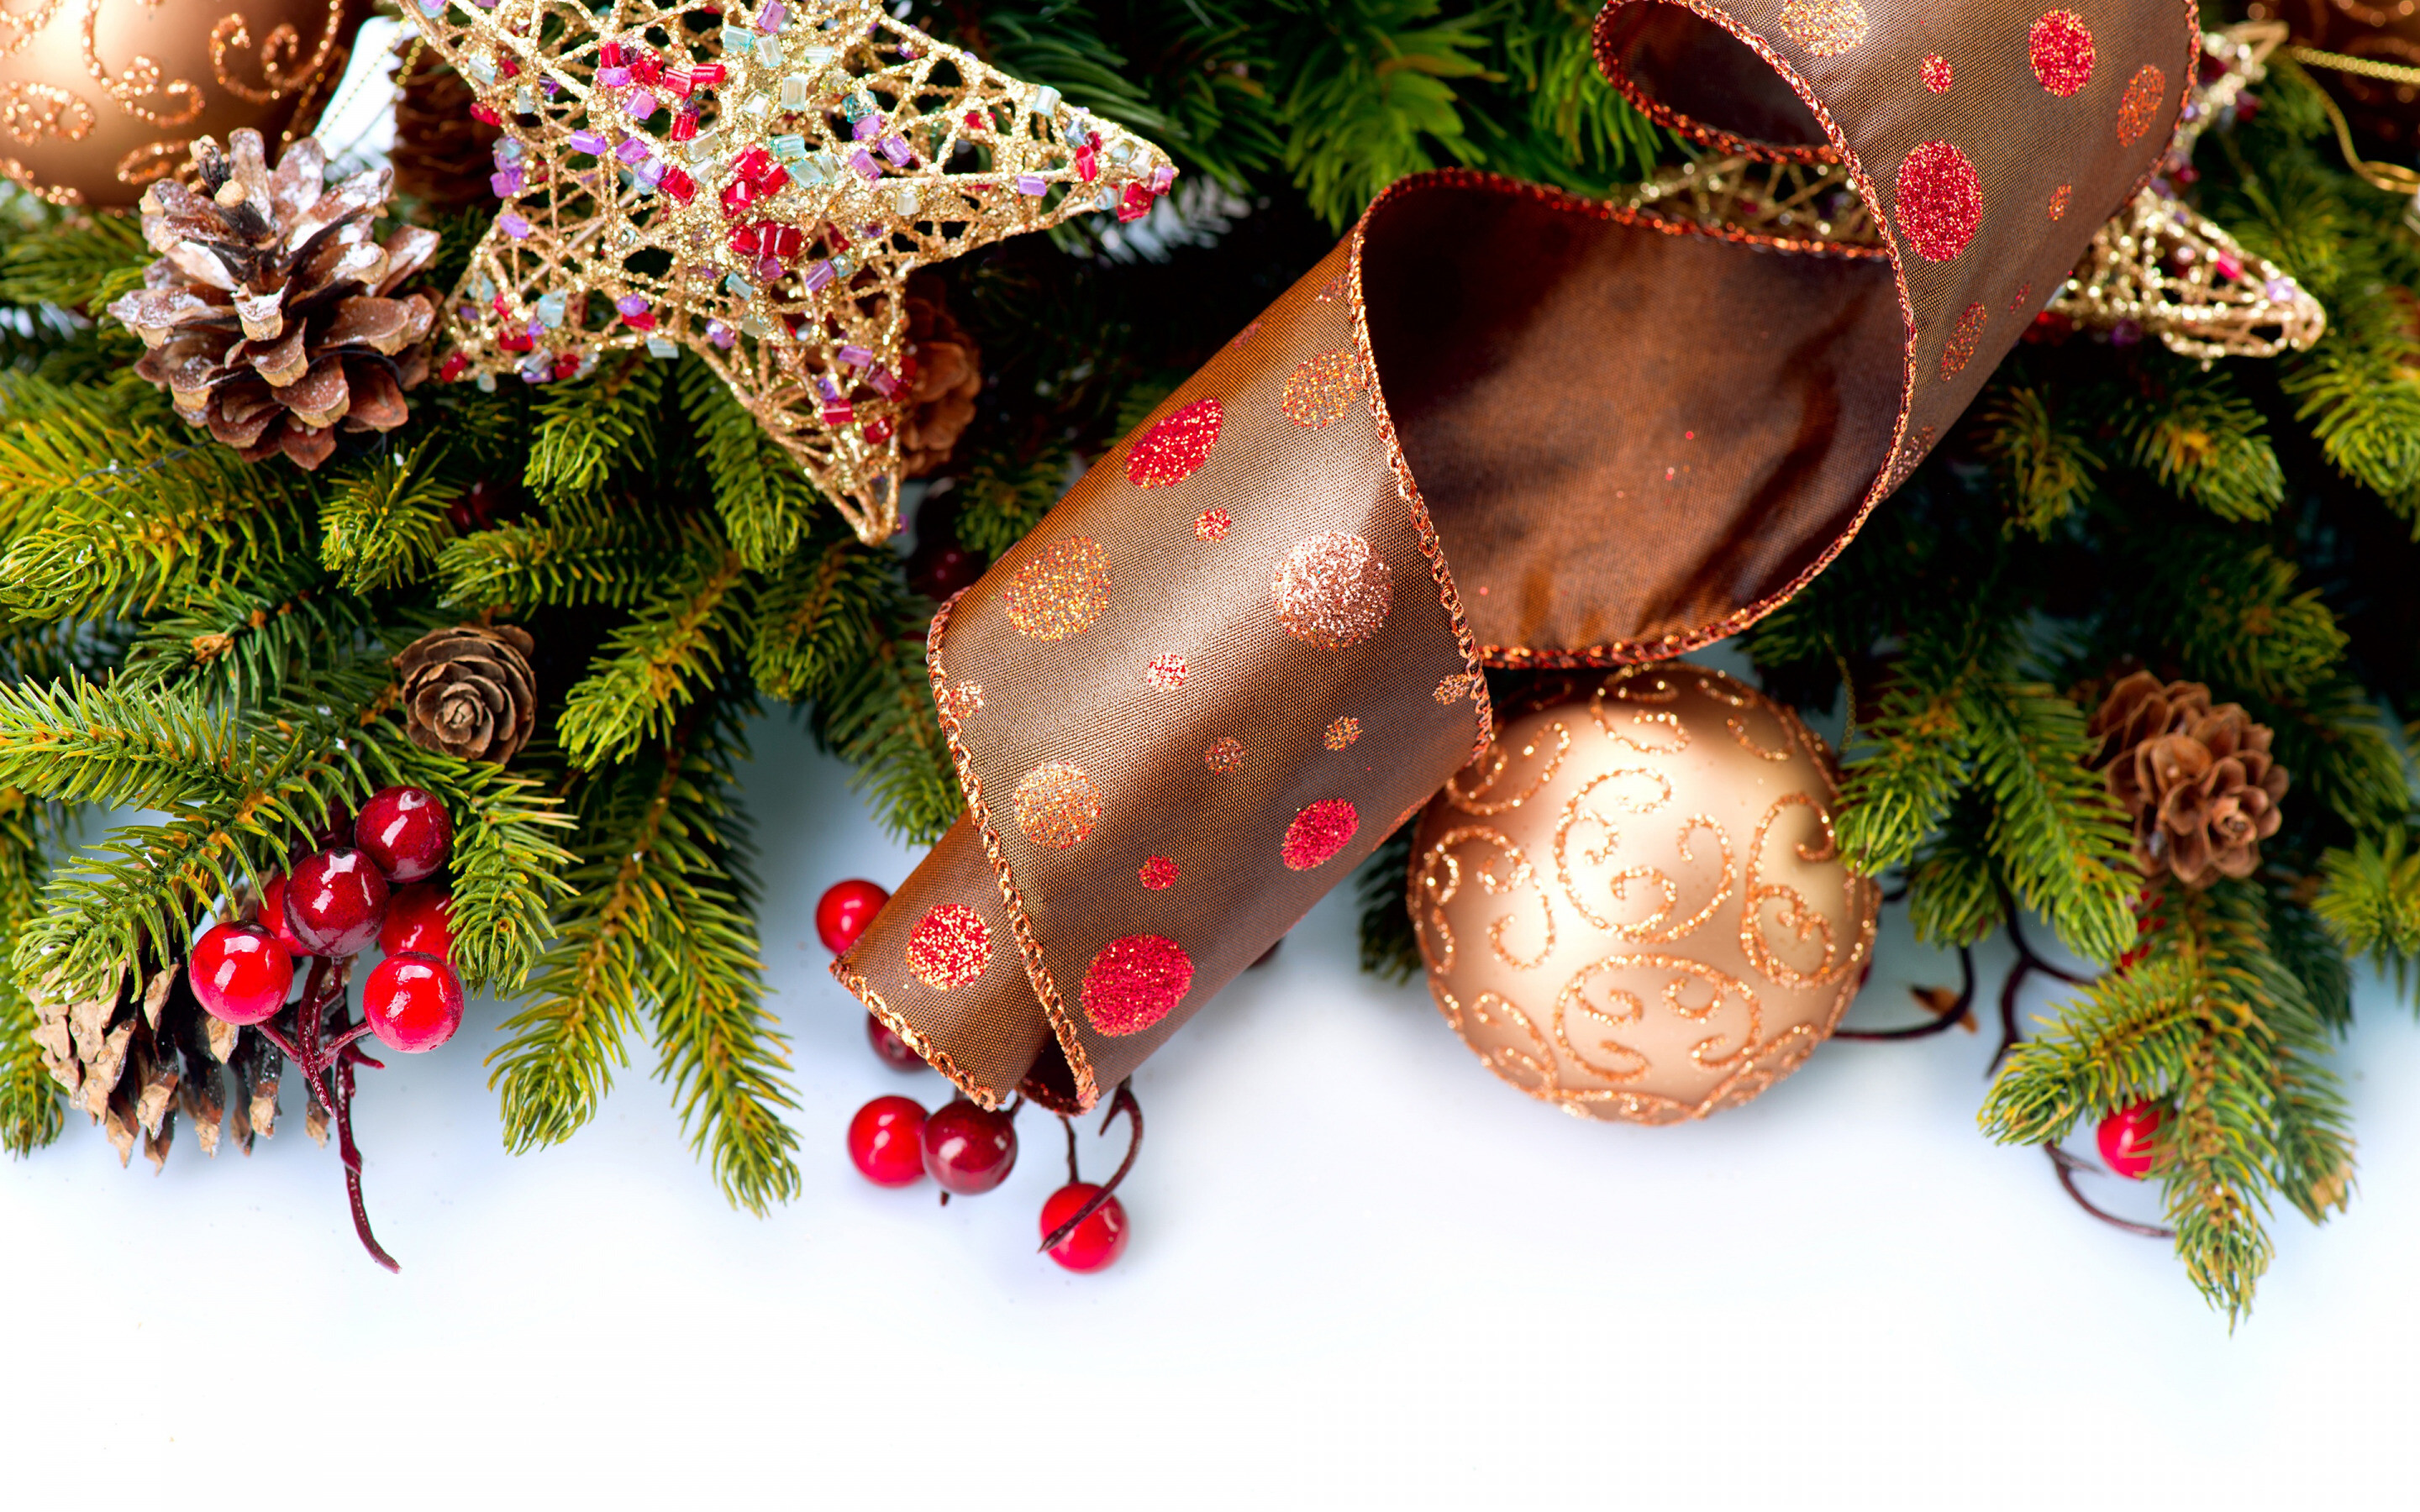 Decorations: Christmas ornament, Things to adorn, Celebration. 2880x1800 HD Wallpaper.